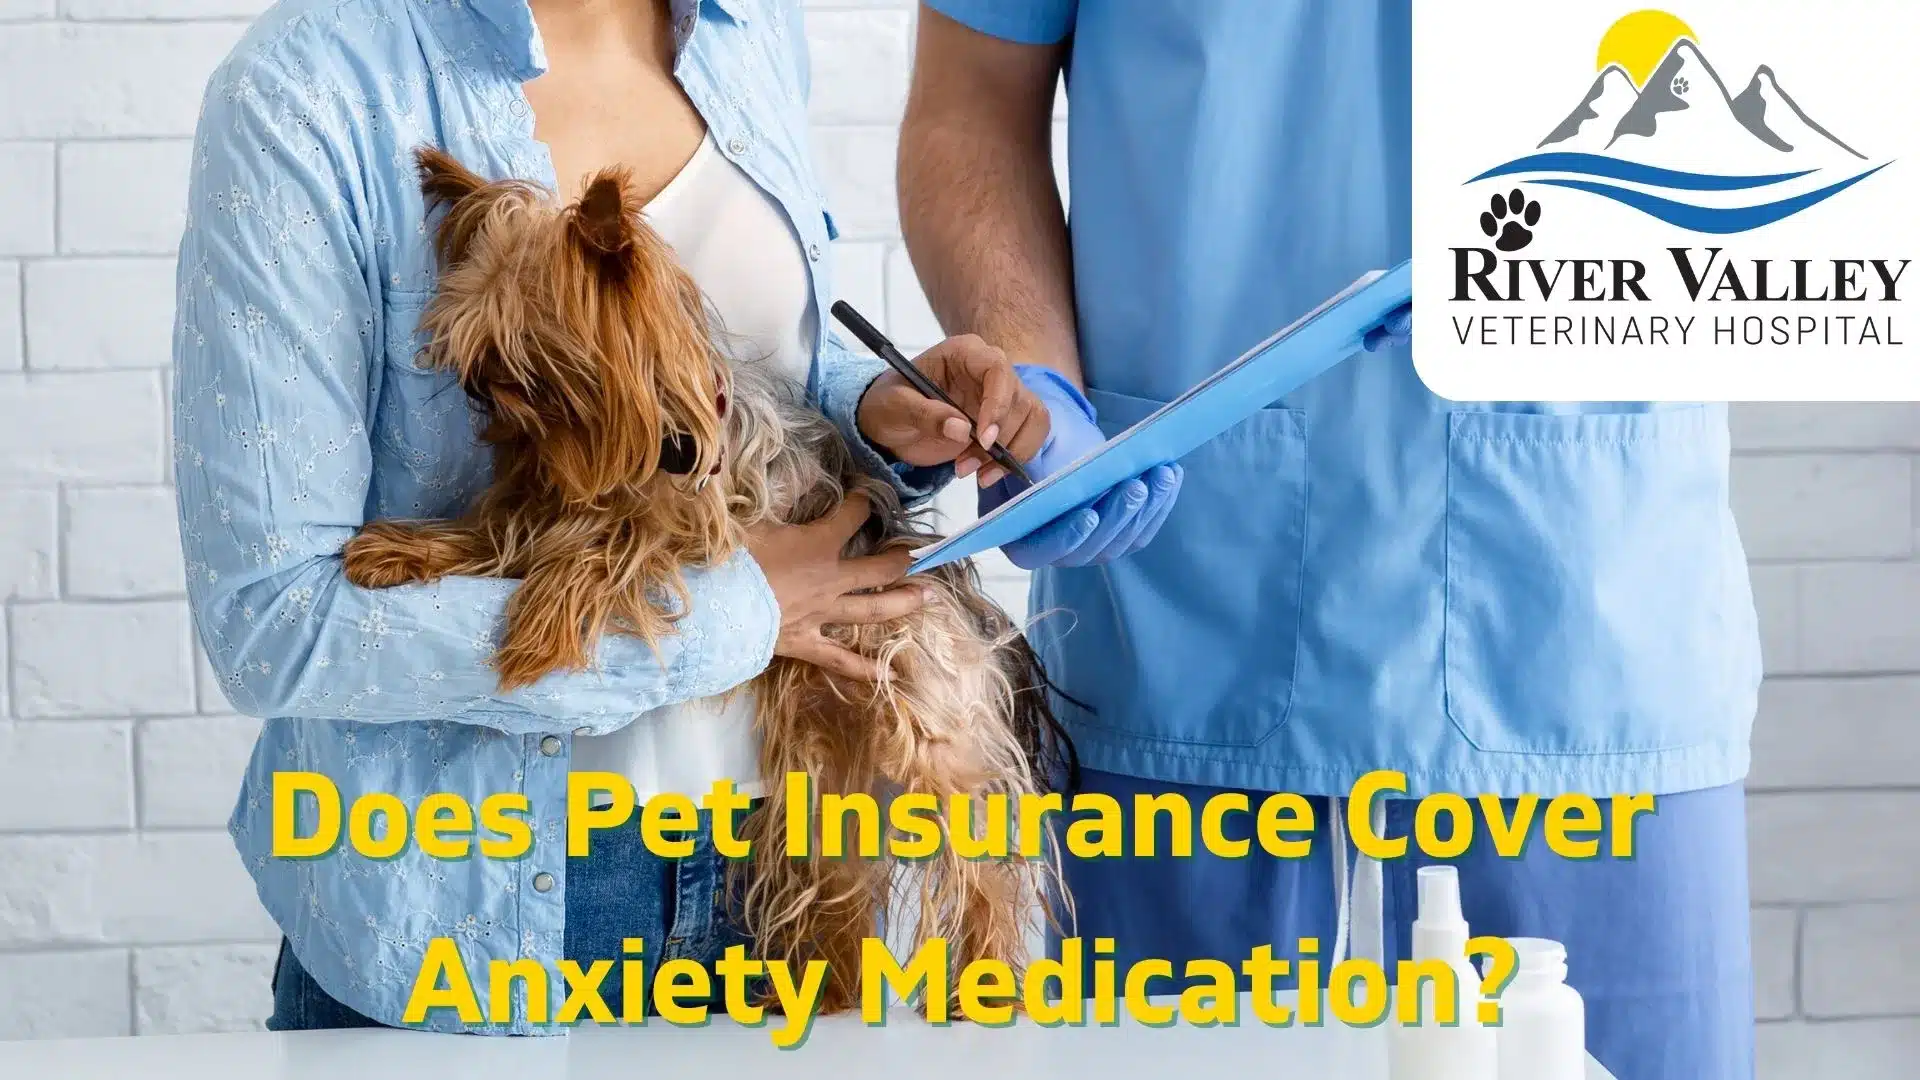 Does Pet Insurance Cover Anxiety Medication